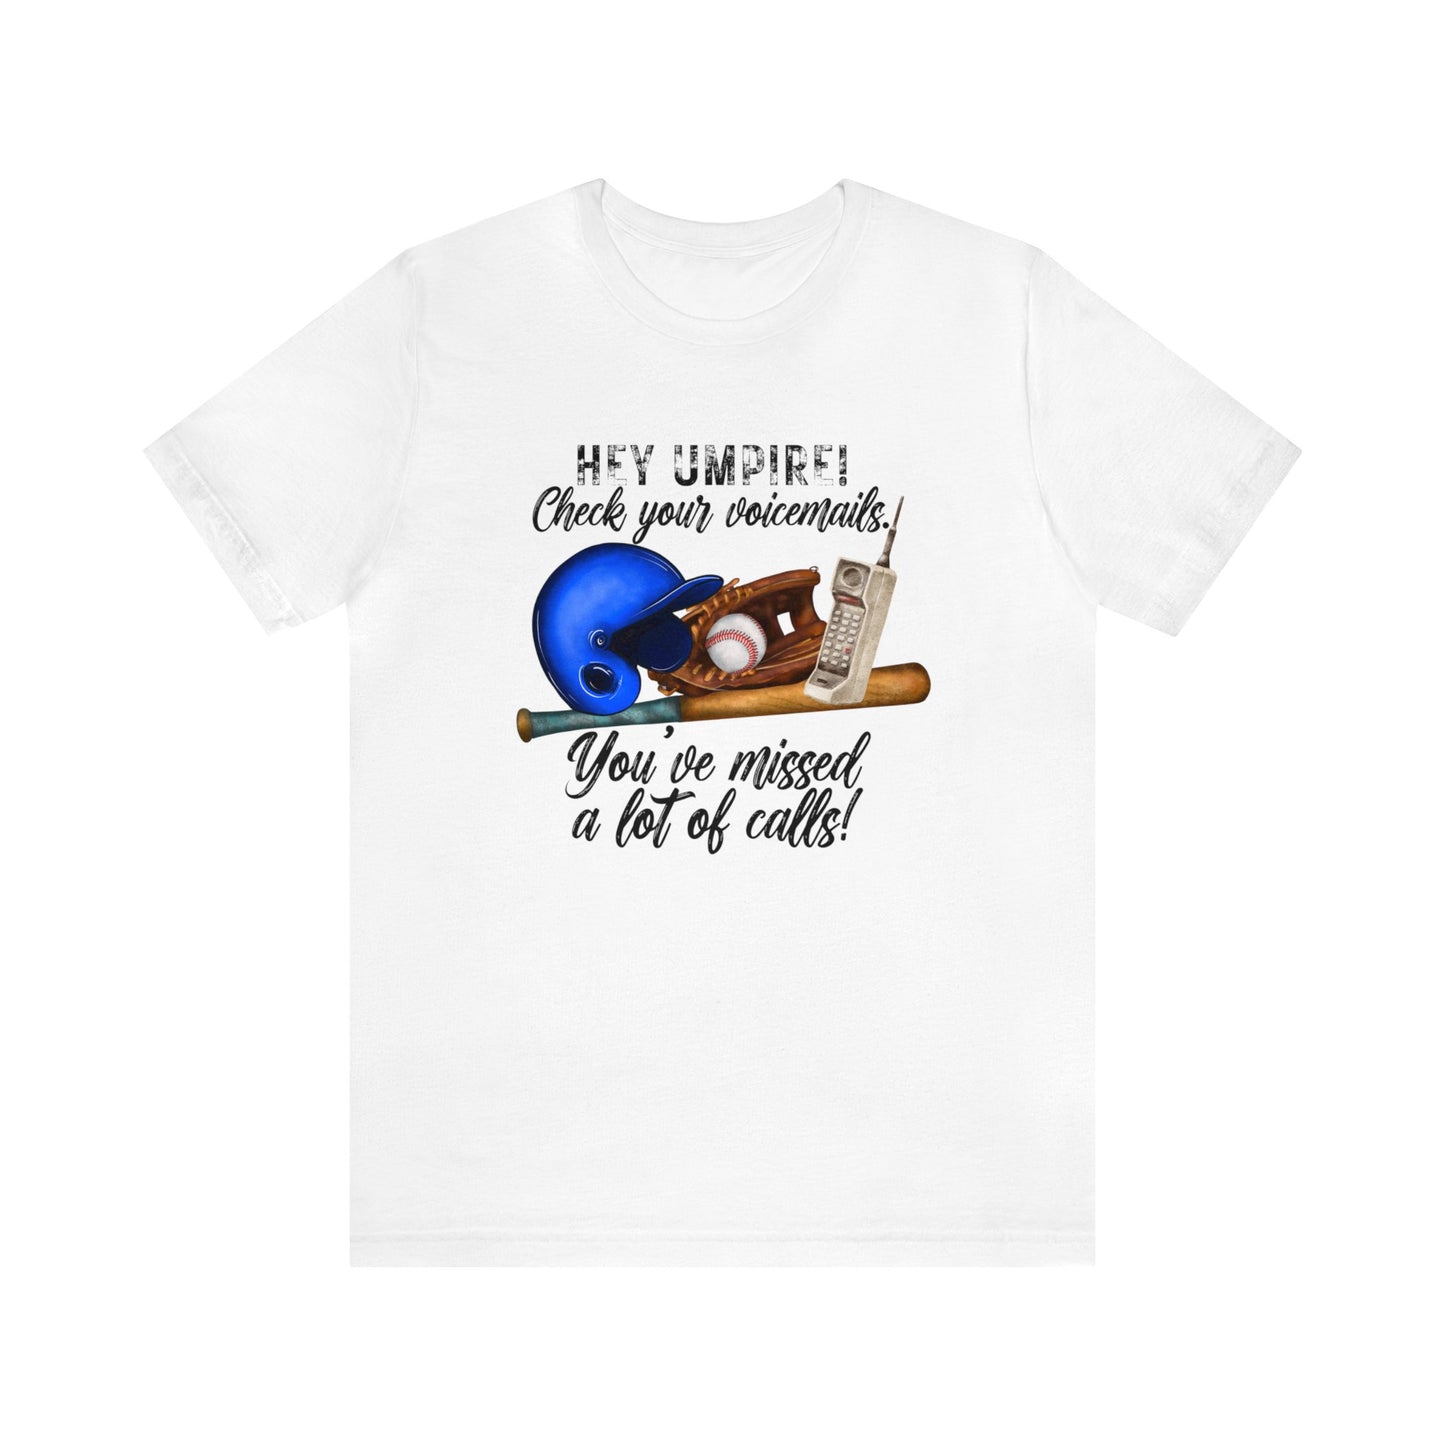 Hey Umpire Check Your Voicemail, You've Missed a lot of Calls -  Short Sleeve Tee